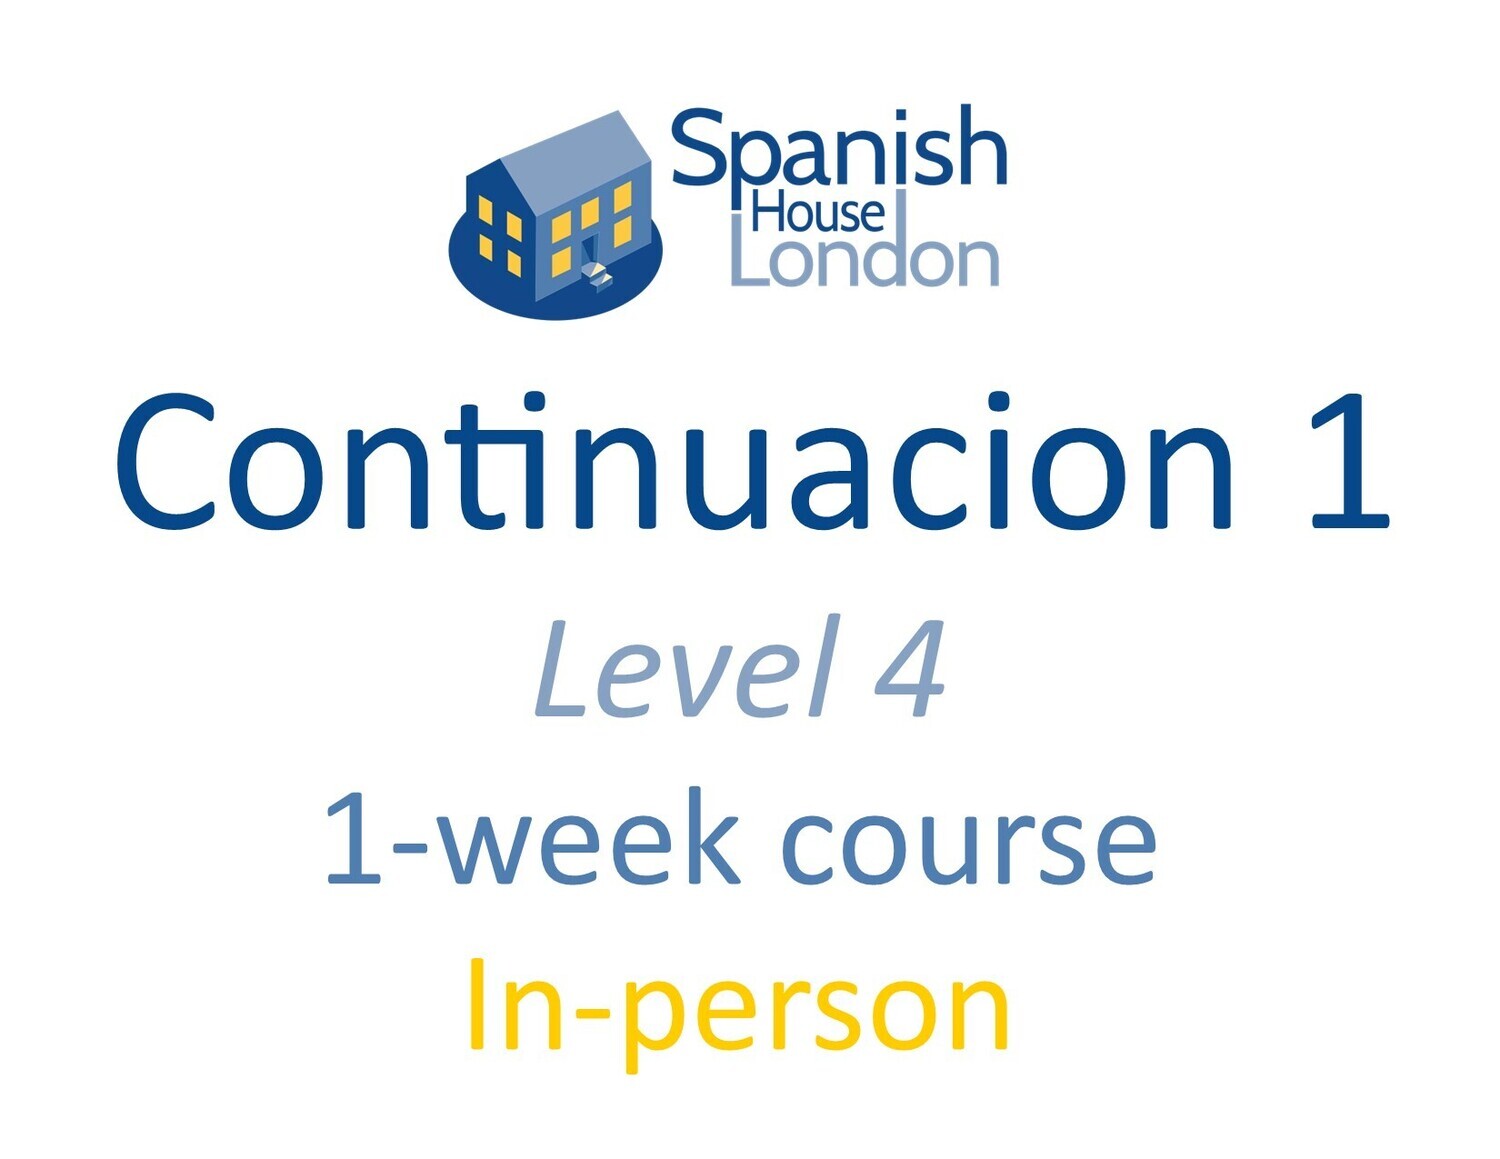 One-Week Intensive Continuación 1 Course starting on 18th March at 10.30am in Clapham North